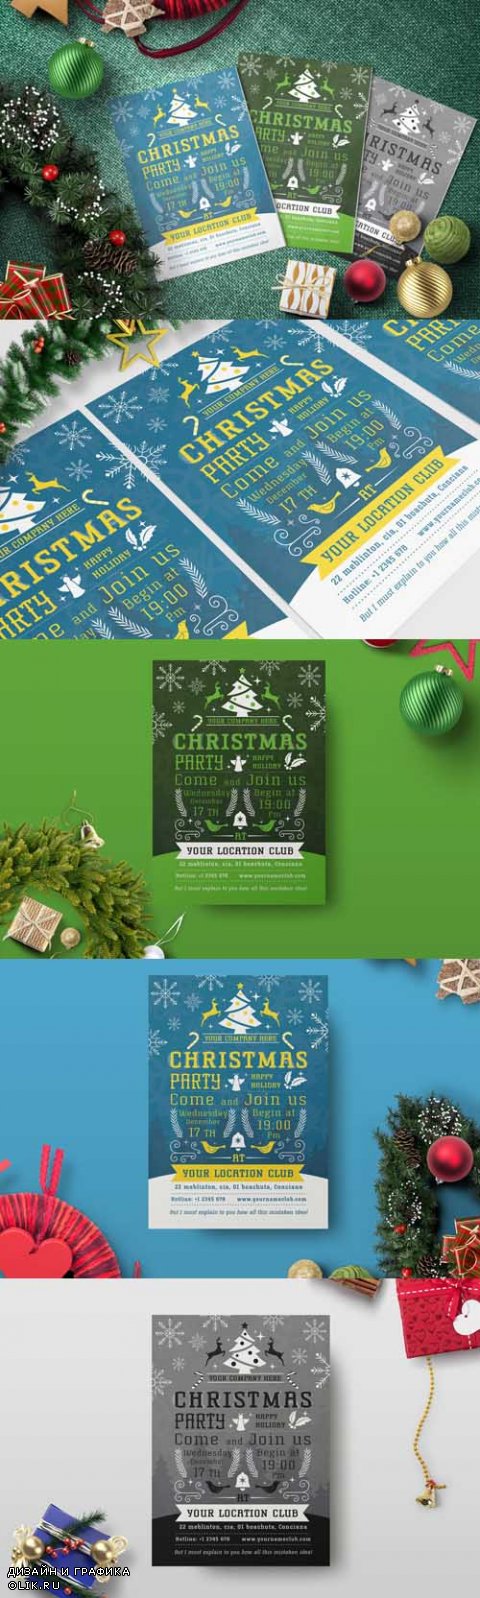 Flyer Template - Christmas Party 2